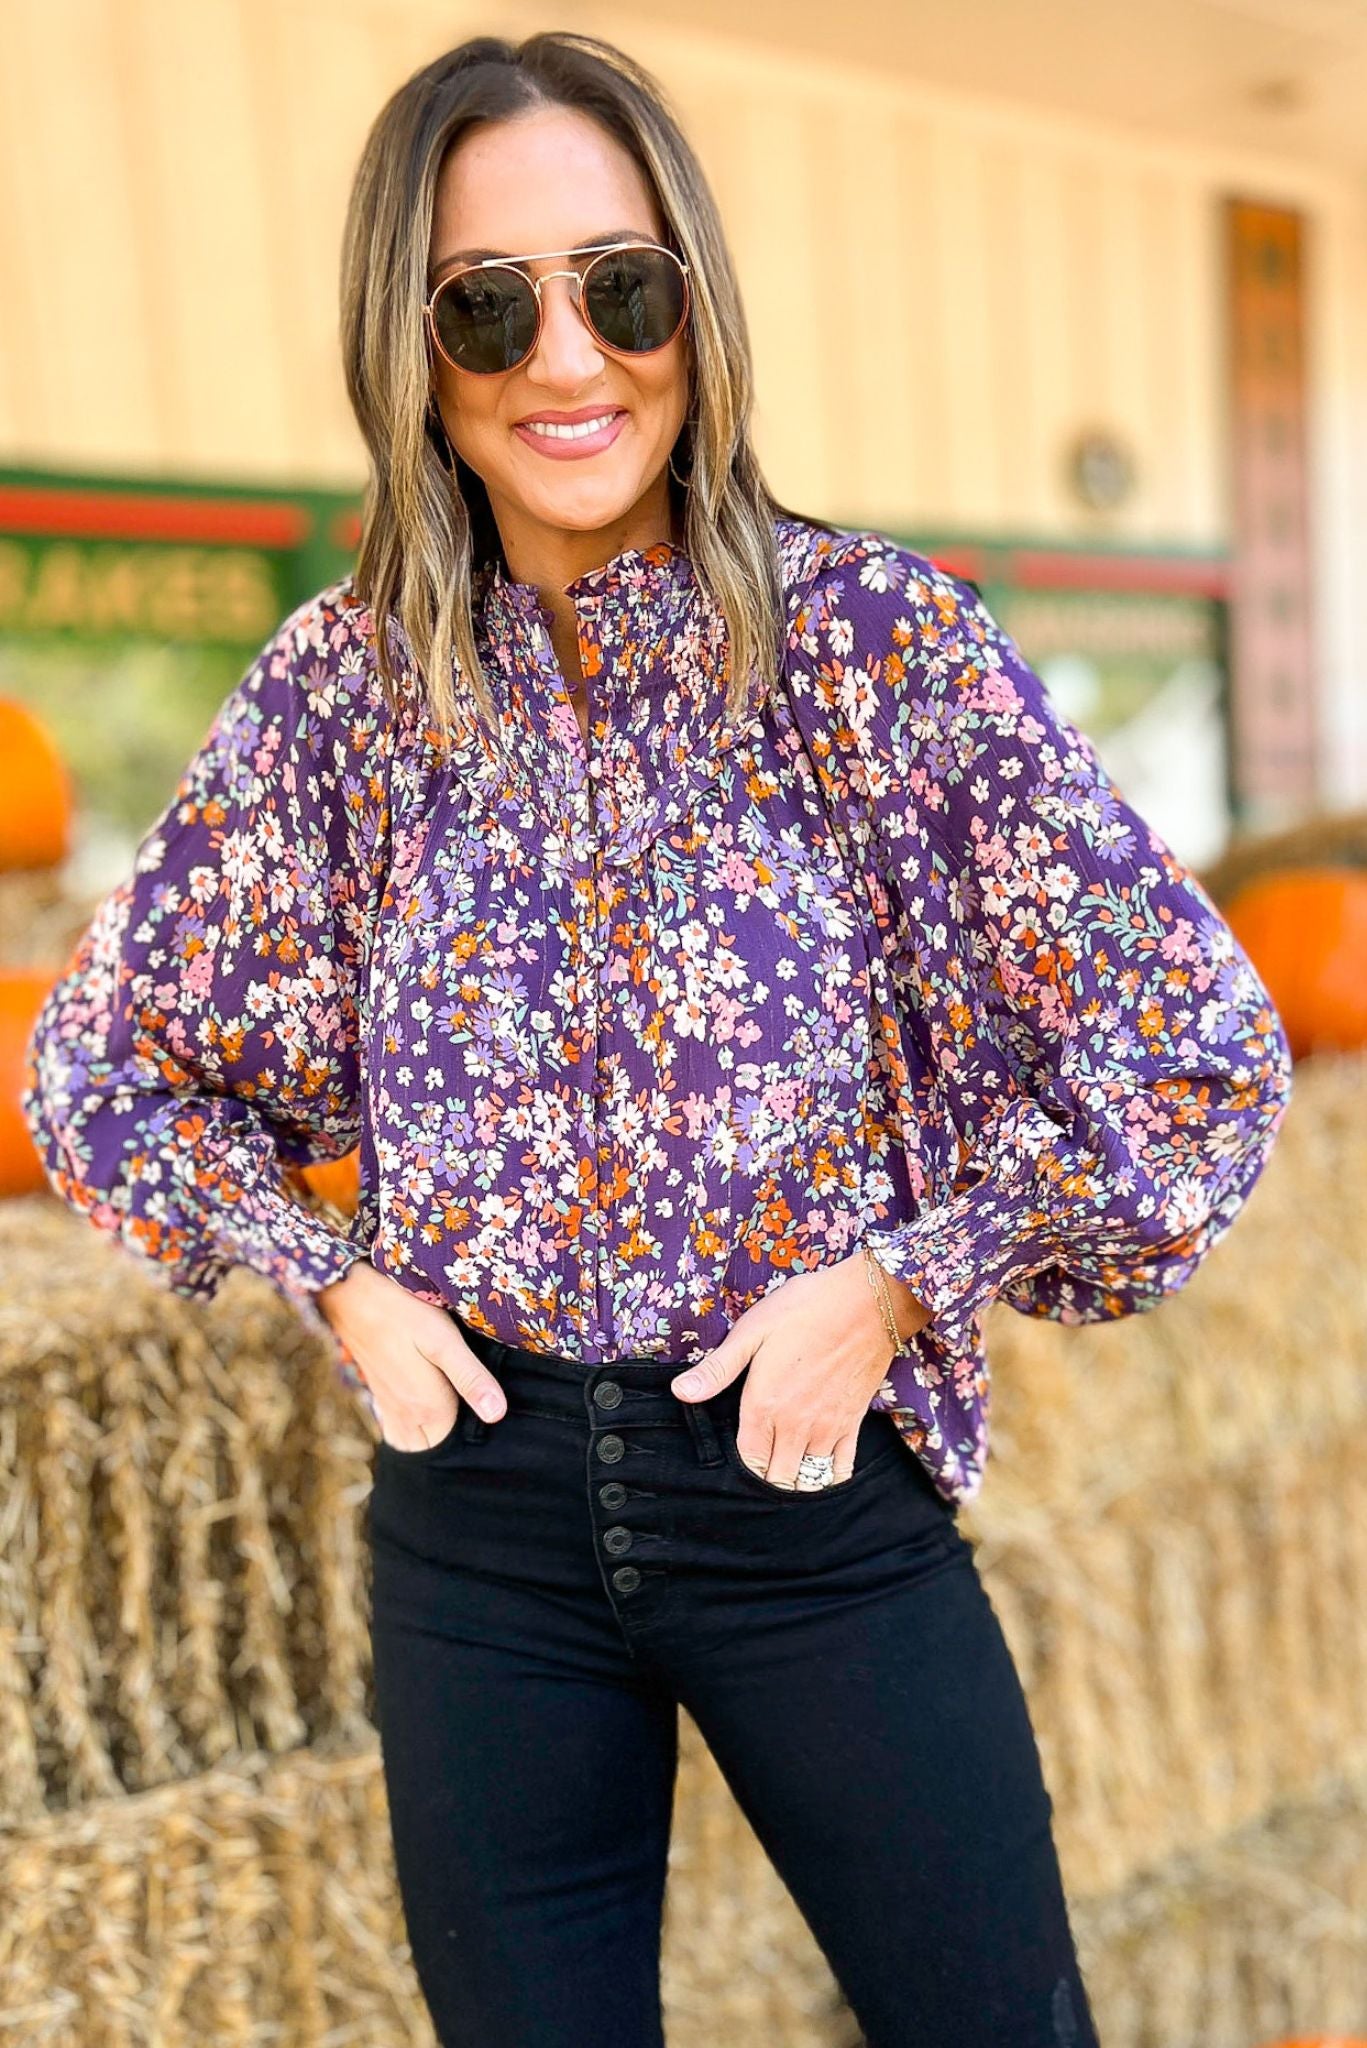 Load image into Gallery viewer, Purple Floral Ruffle Hem Button Down Top by Karlie, fall fashion, must have, layered look, elevated look, chic, mom style, shop style your senses by mallory fitzsimmons
